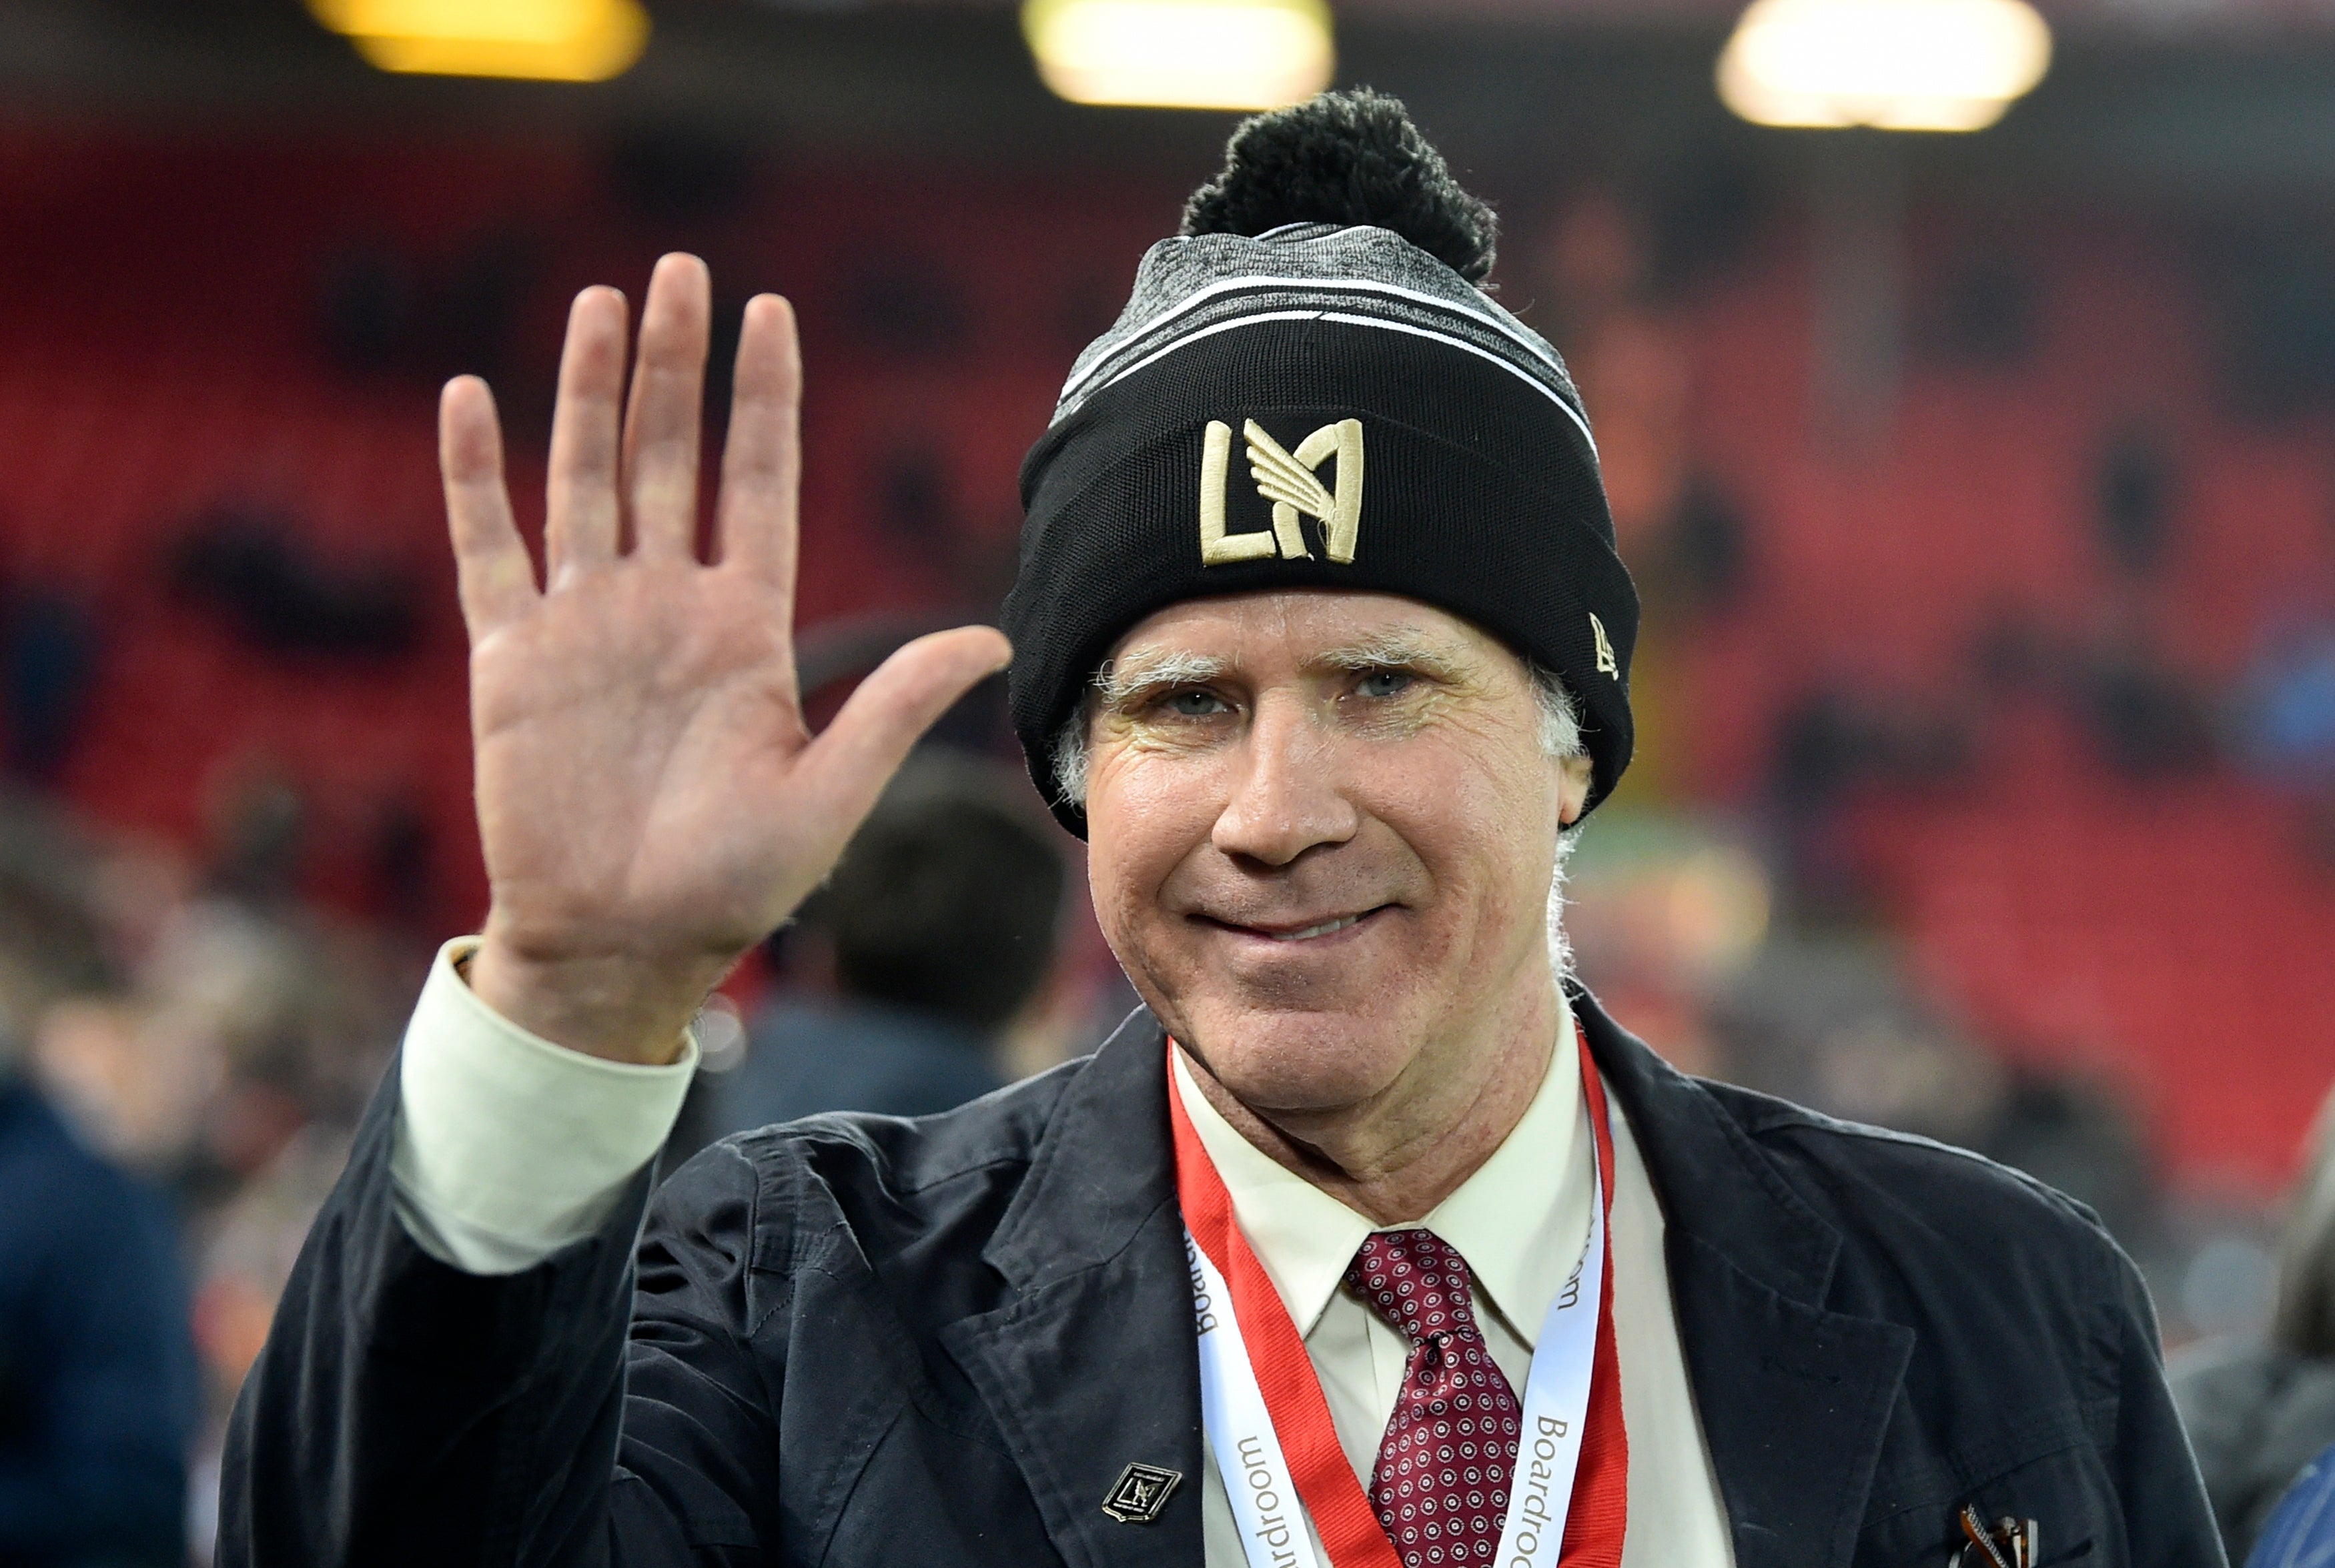 Will Ferrell at Anfield for Liverpool’s win over Everton